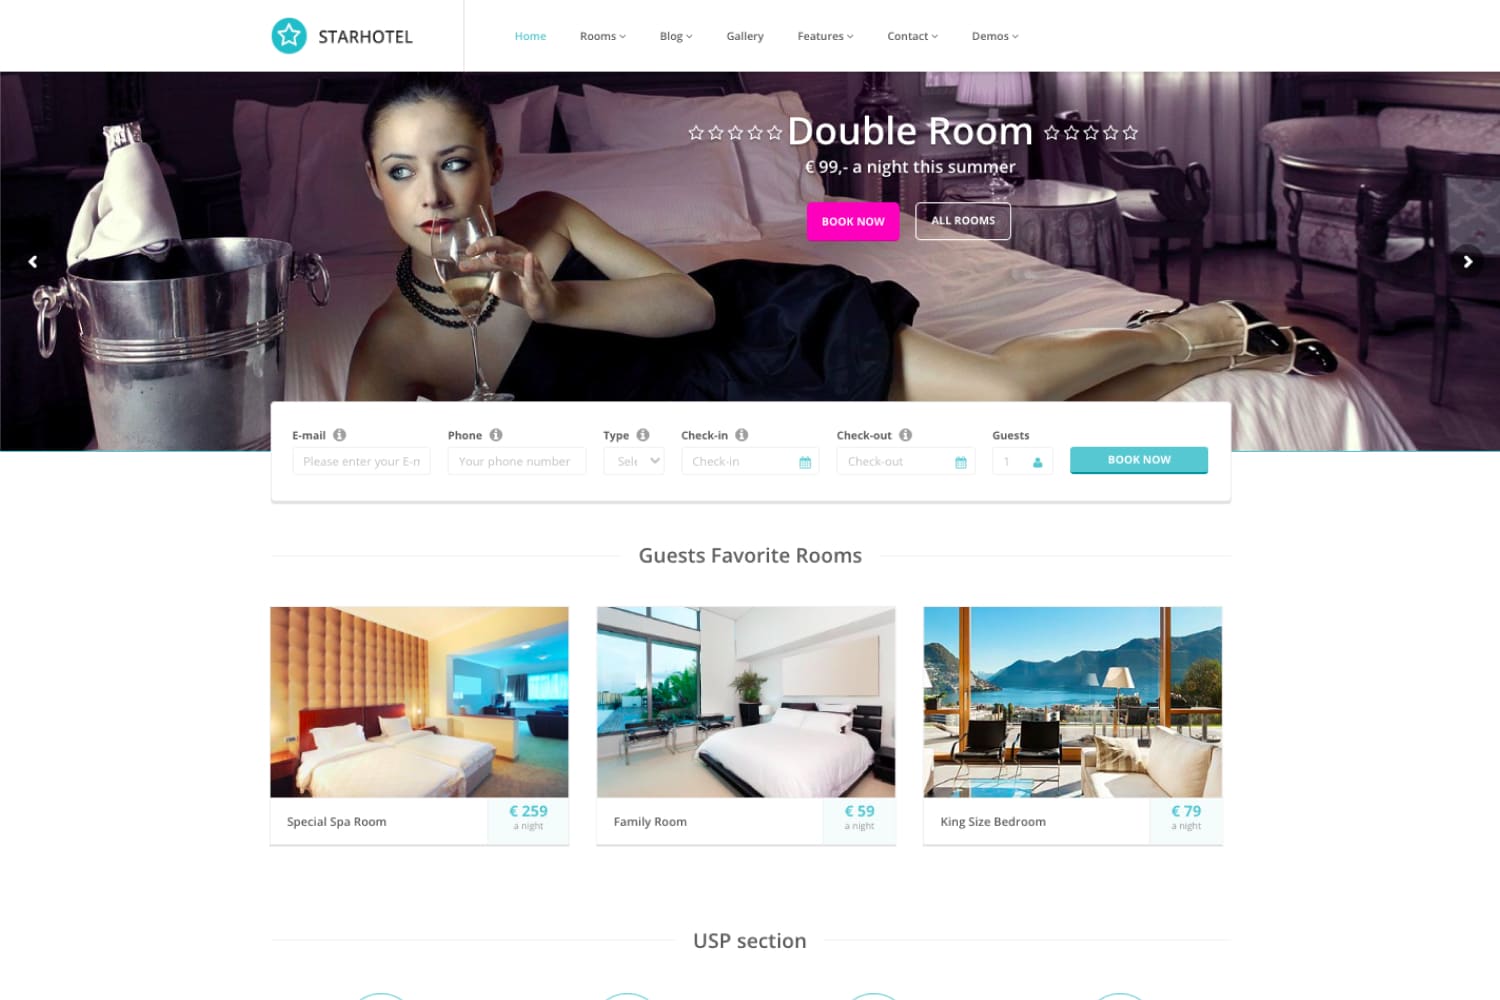 The main page of the hotel website with a photo of a girl on a bed in a slider and a block of photos of rooms.